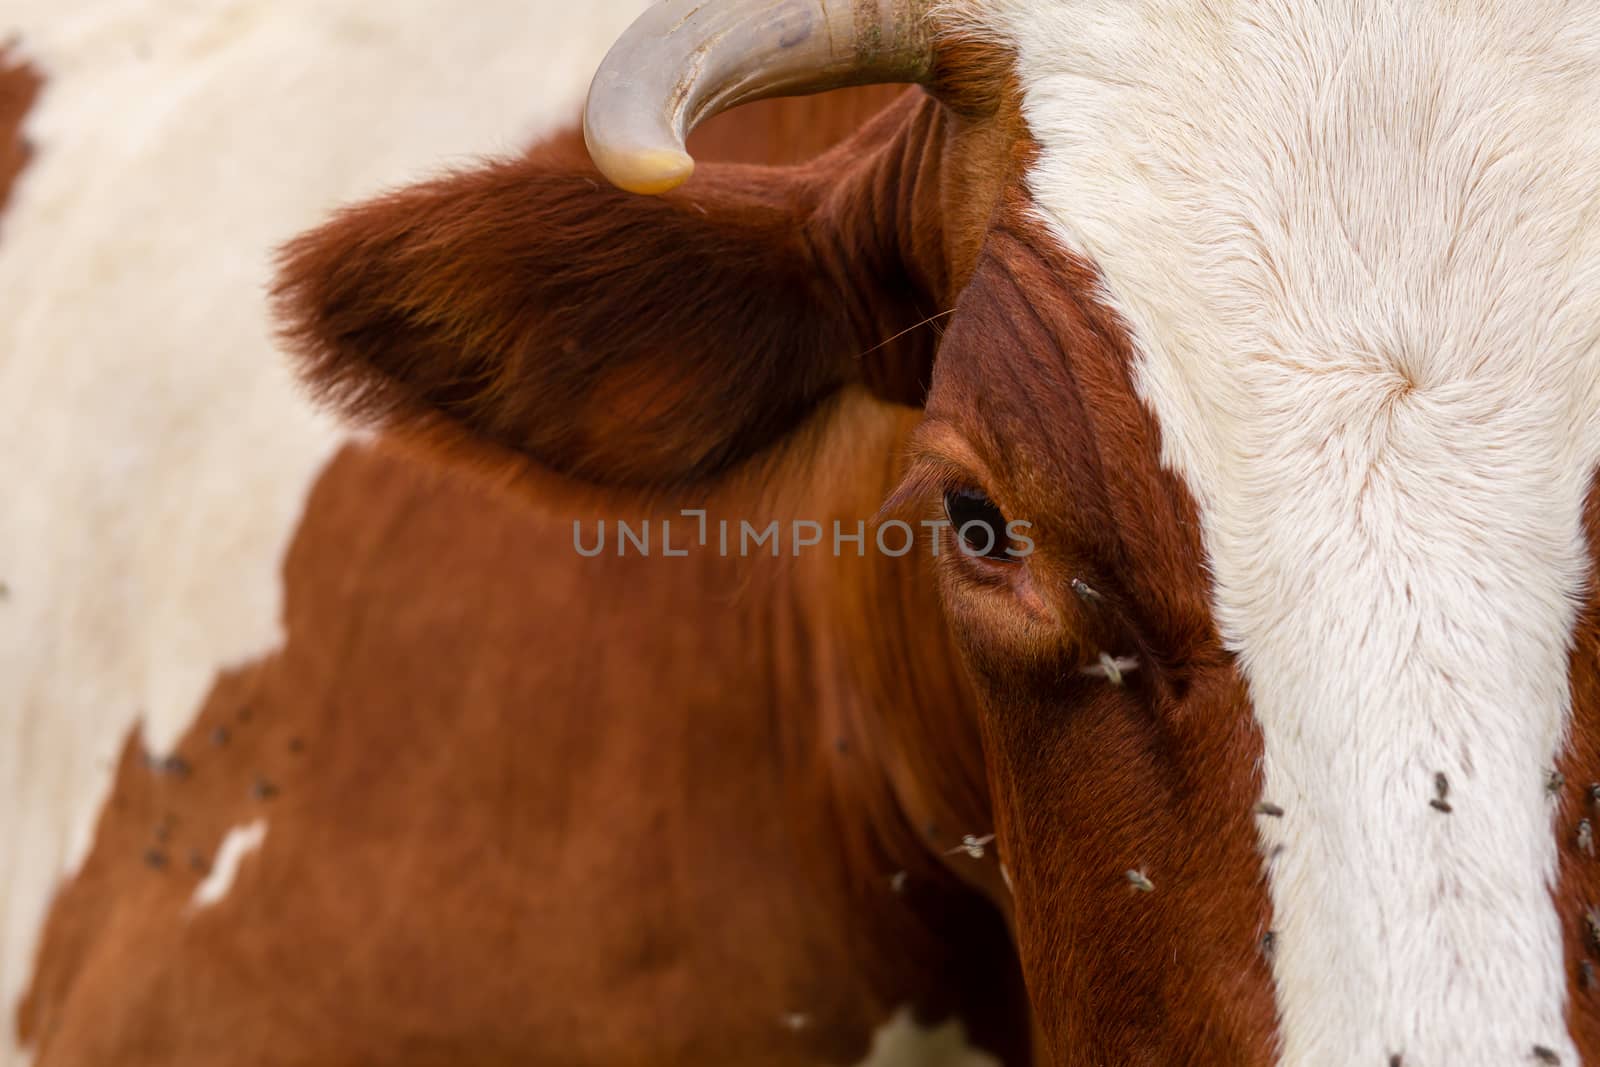 Close-up of a cow attacked by flies. Parasites cause discomfort in livestock